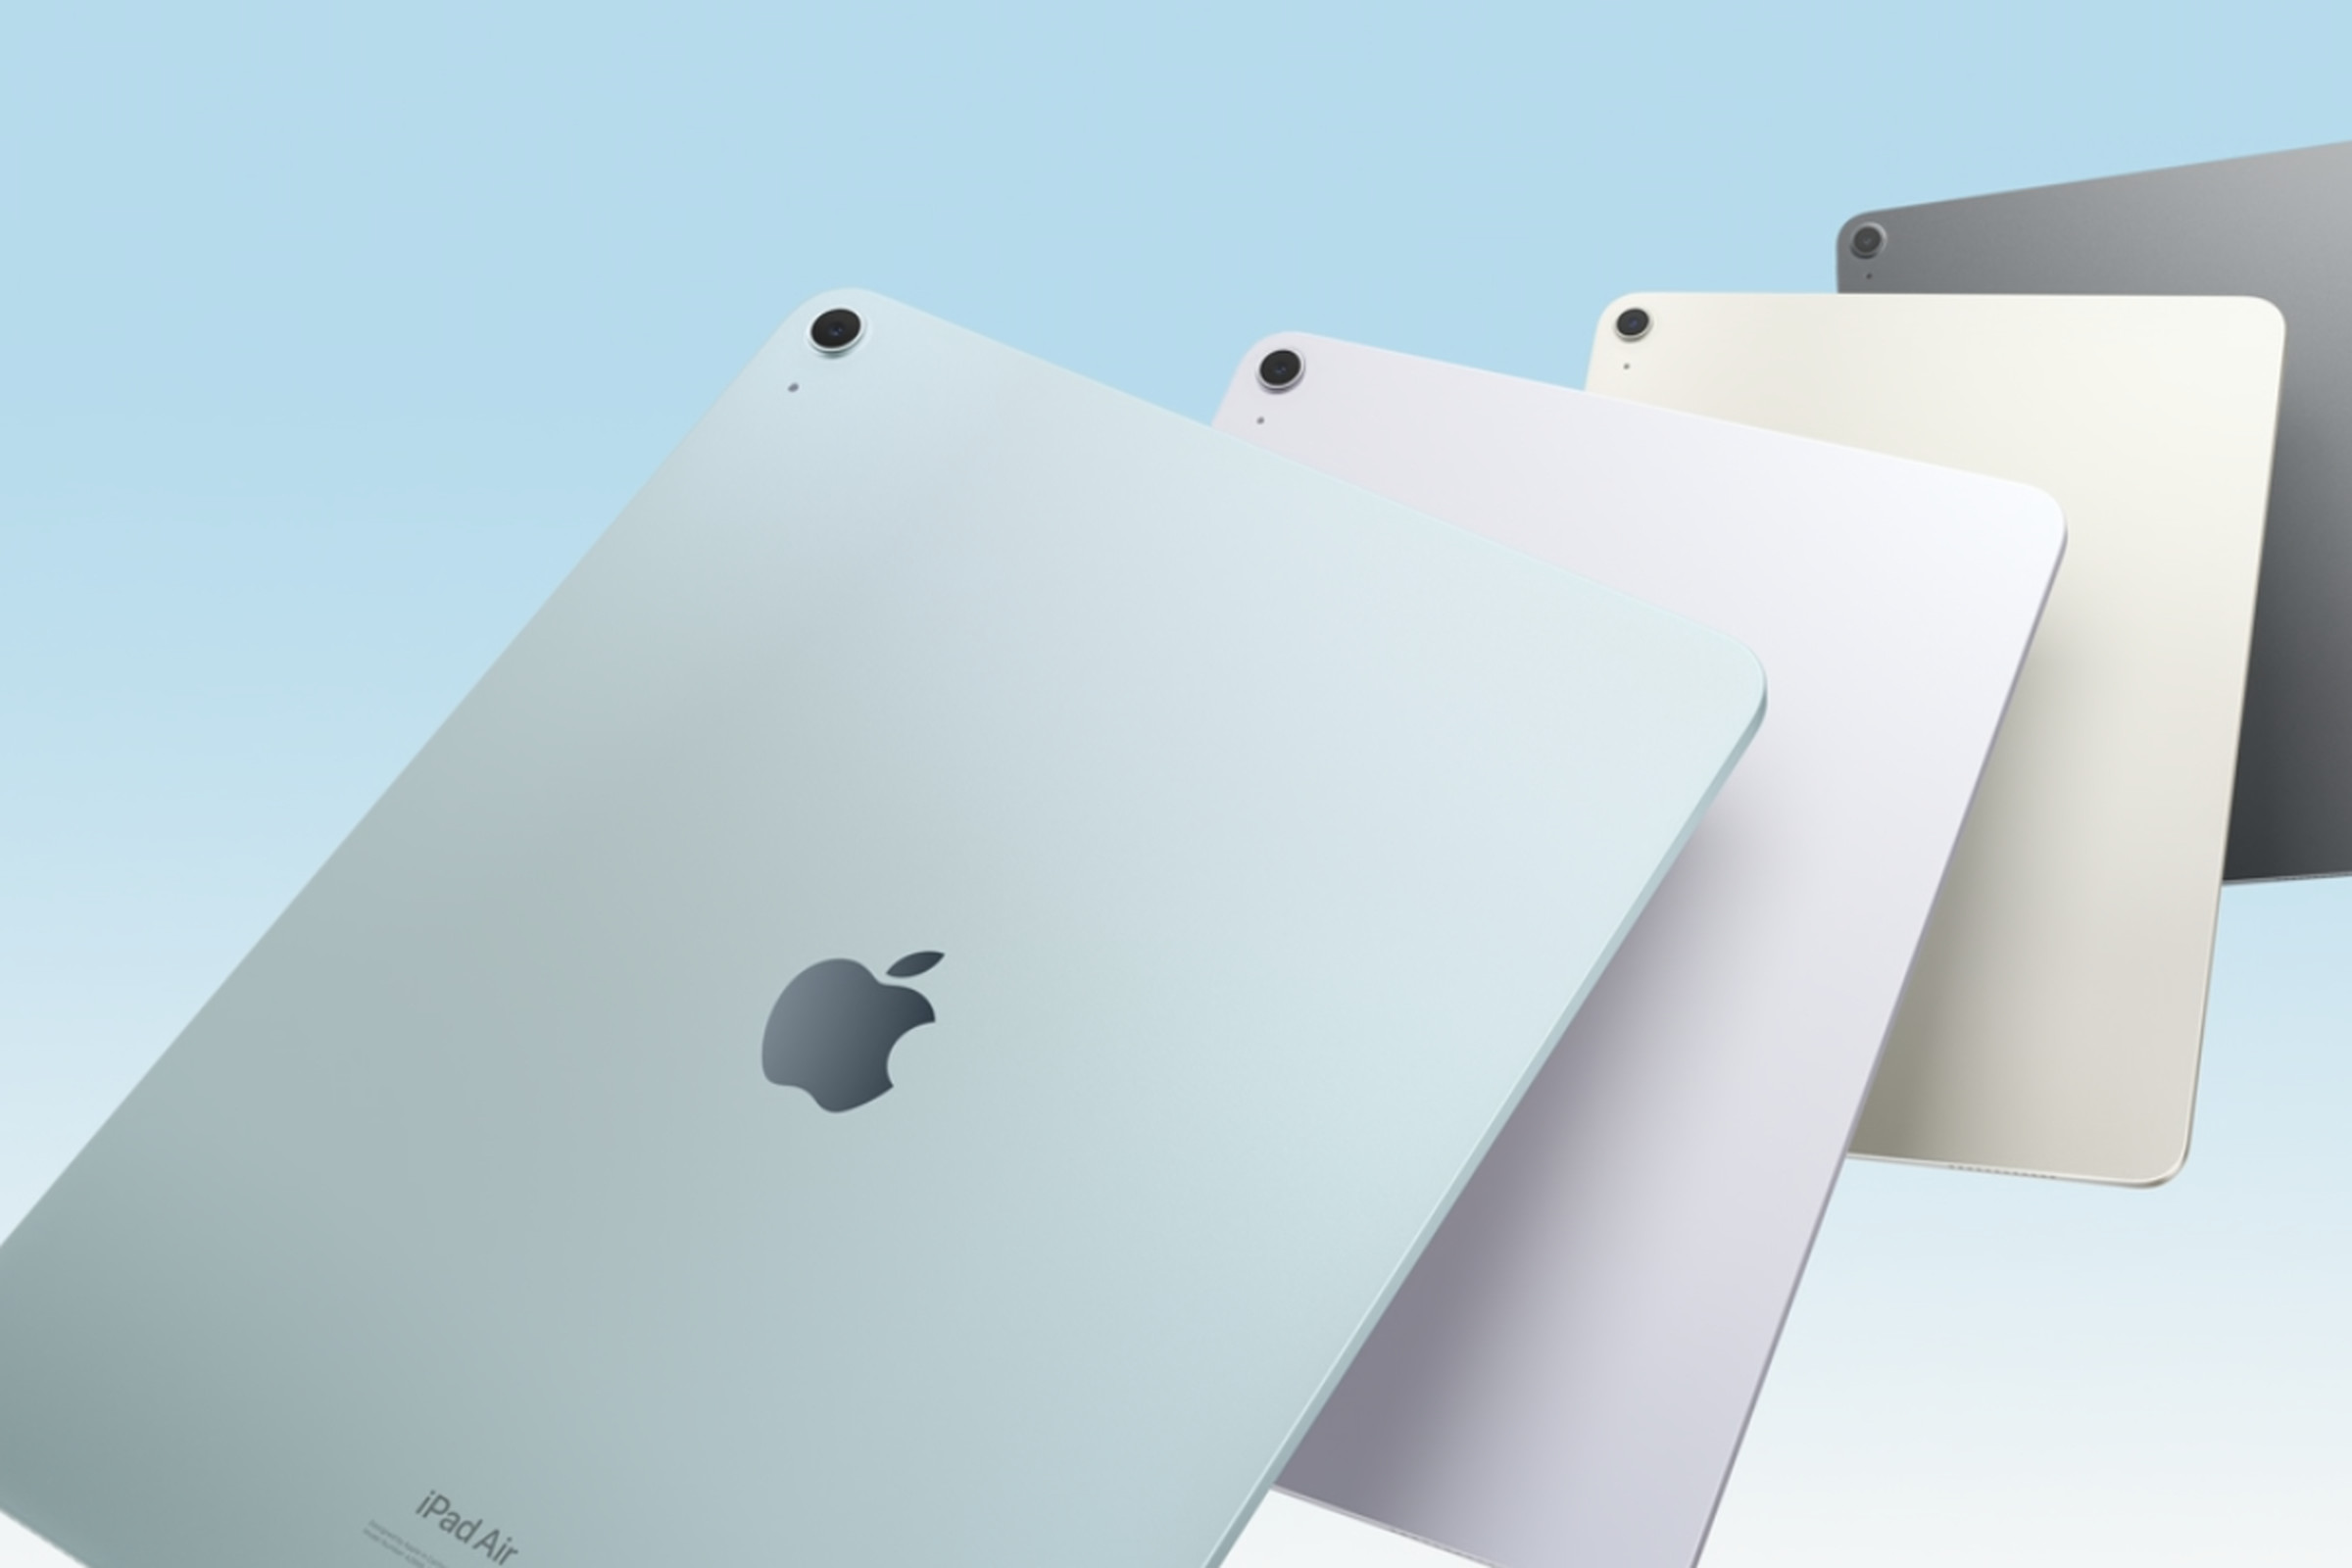 An image showing Apple’s iPad Air lineup